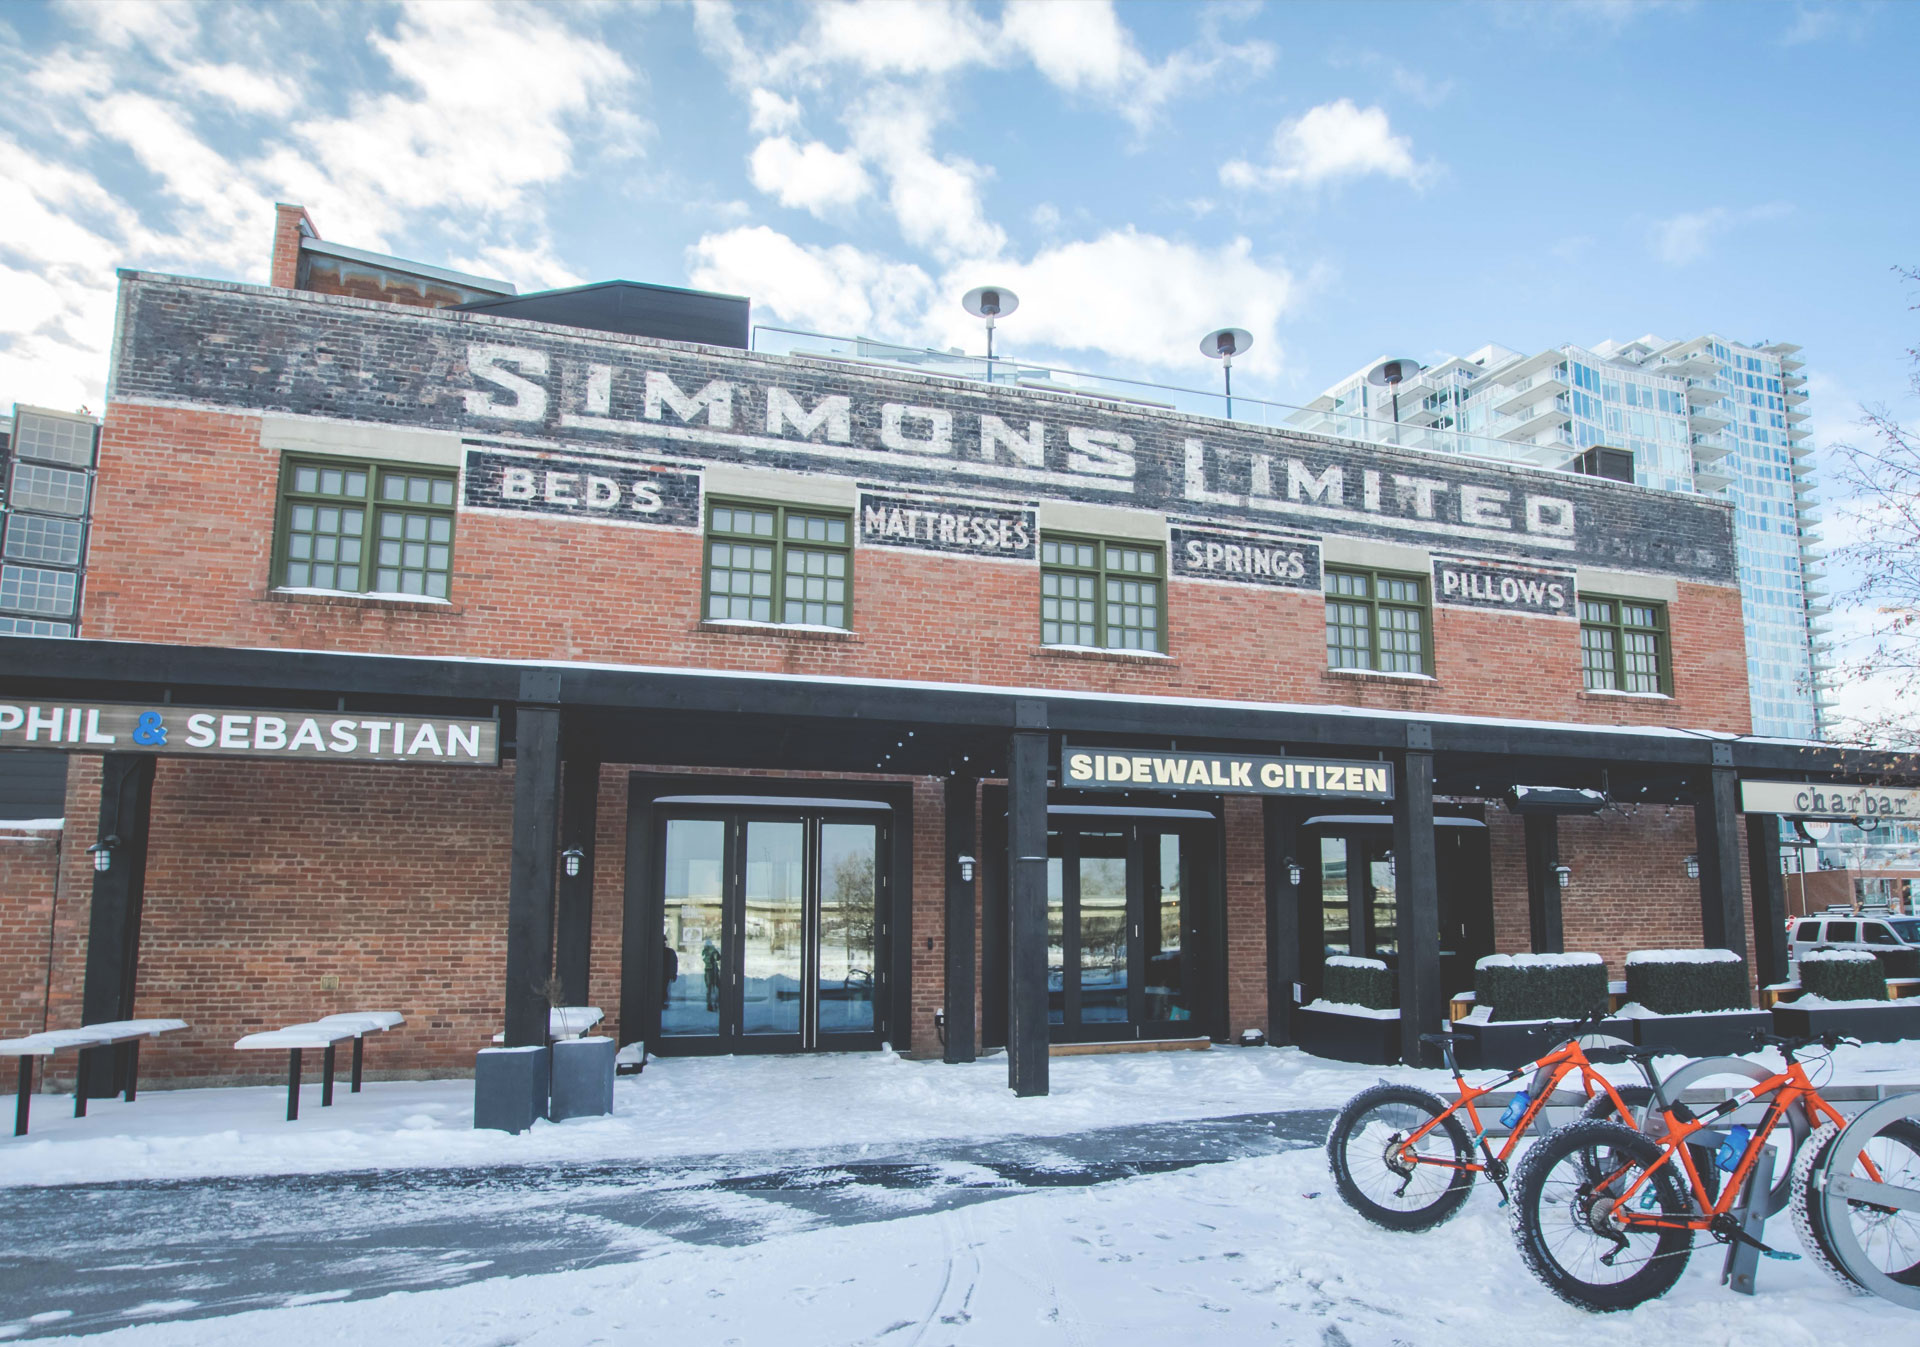 The Simmons Building along the River Walk features great food and drinks for a pit stop